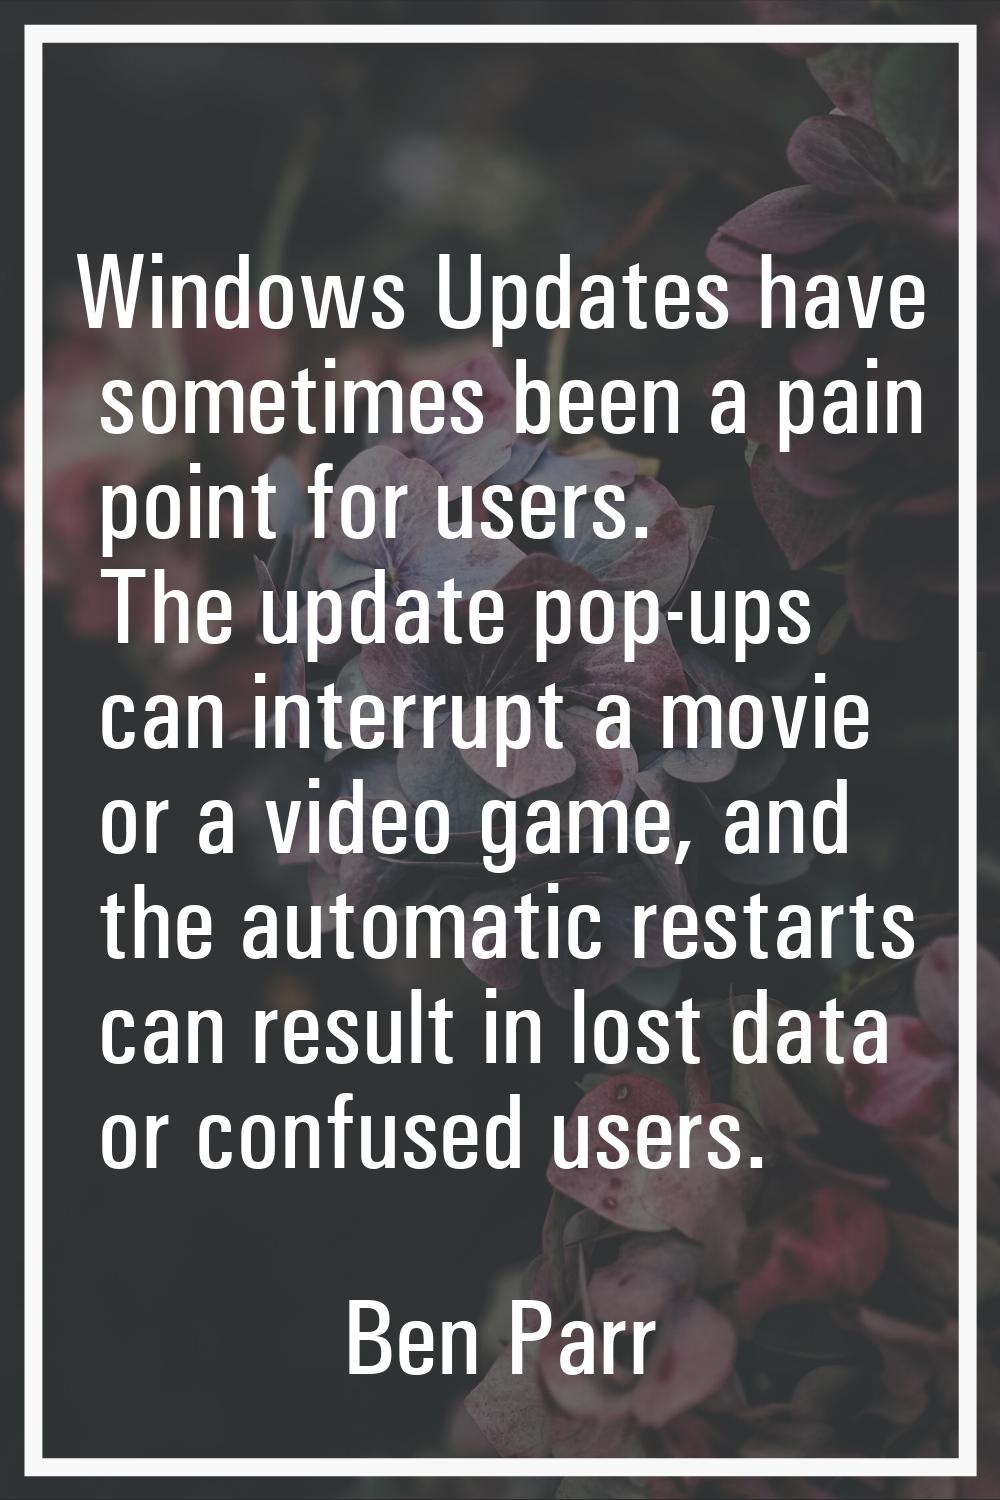 Windows Updates have sometimes been a pain point for users. The update pop-ups can interrupt a movi